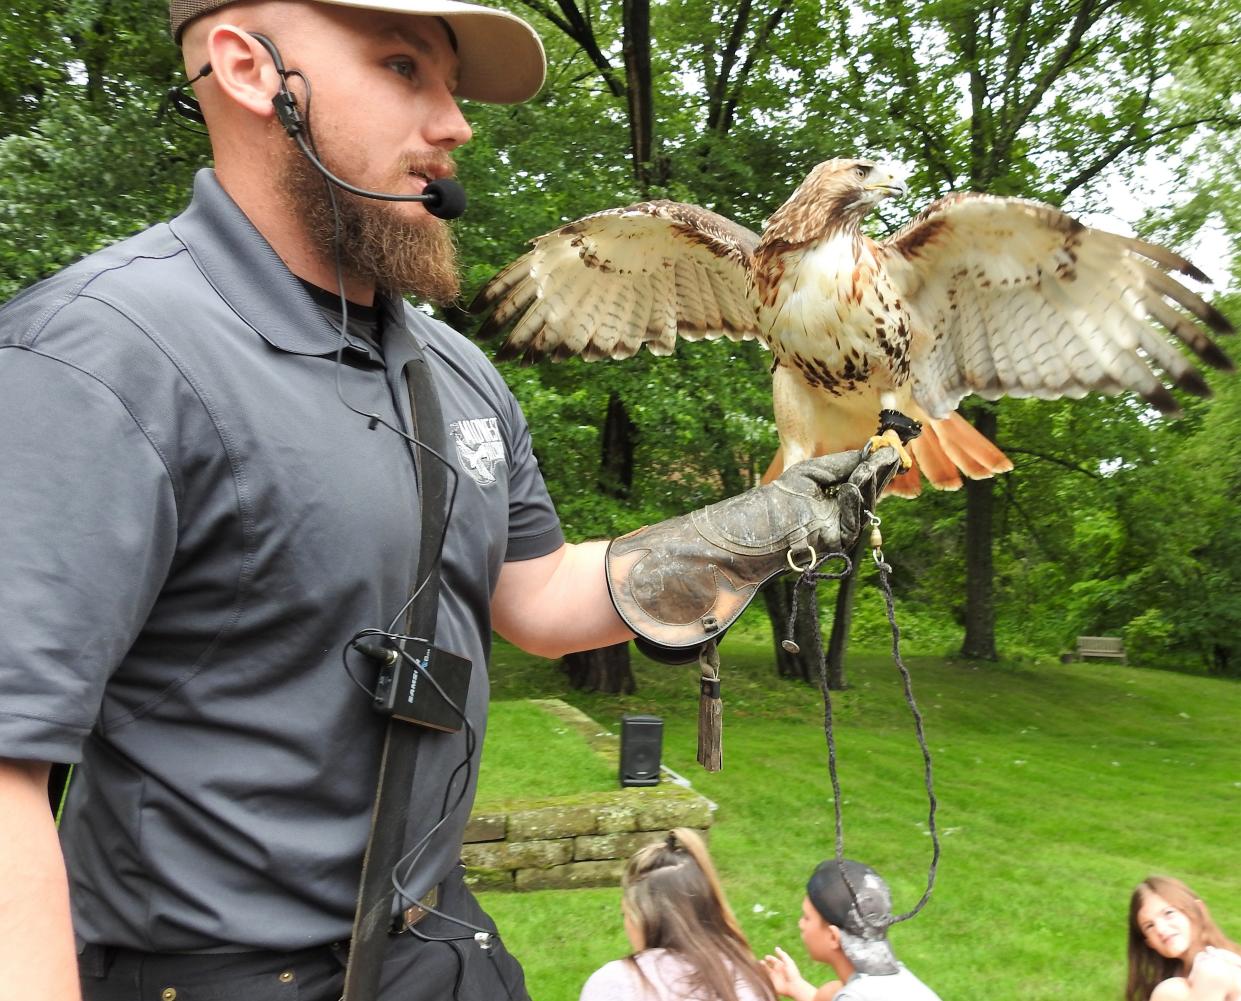 Adam McGuire of Midwest Falconry from outside Cincinnati with one of the birds of prey brought for a presentation recently at Clary Gardens. They had falcons, owls and hawks.